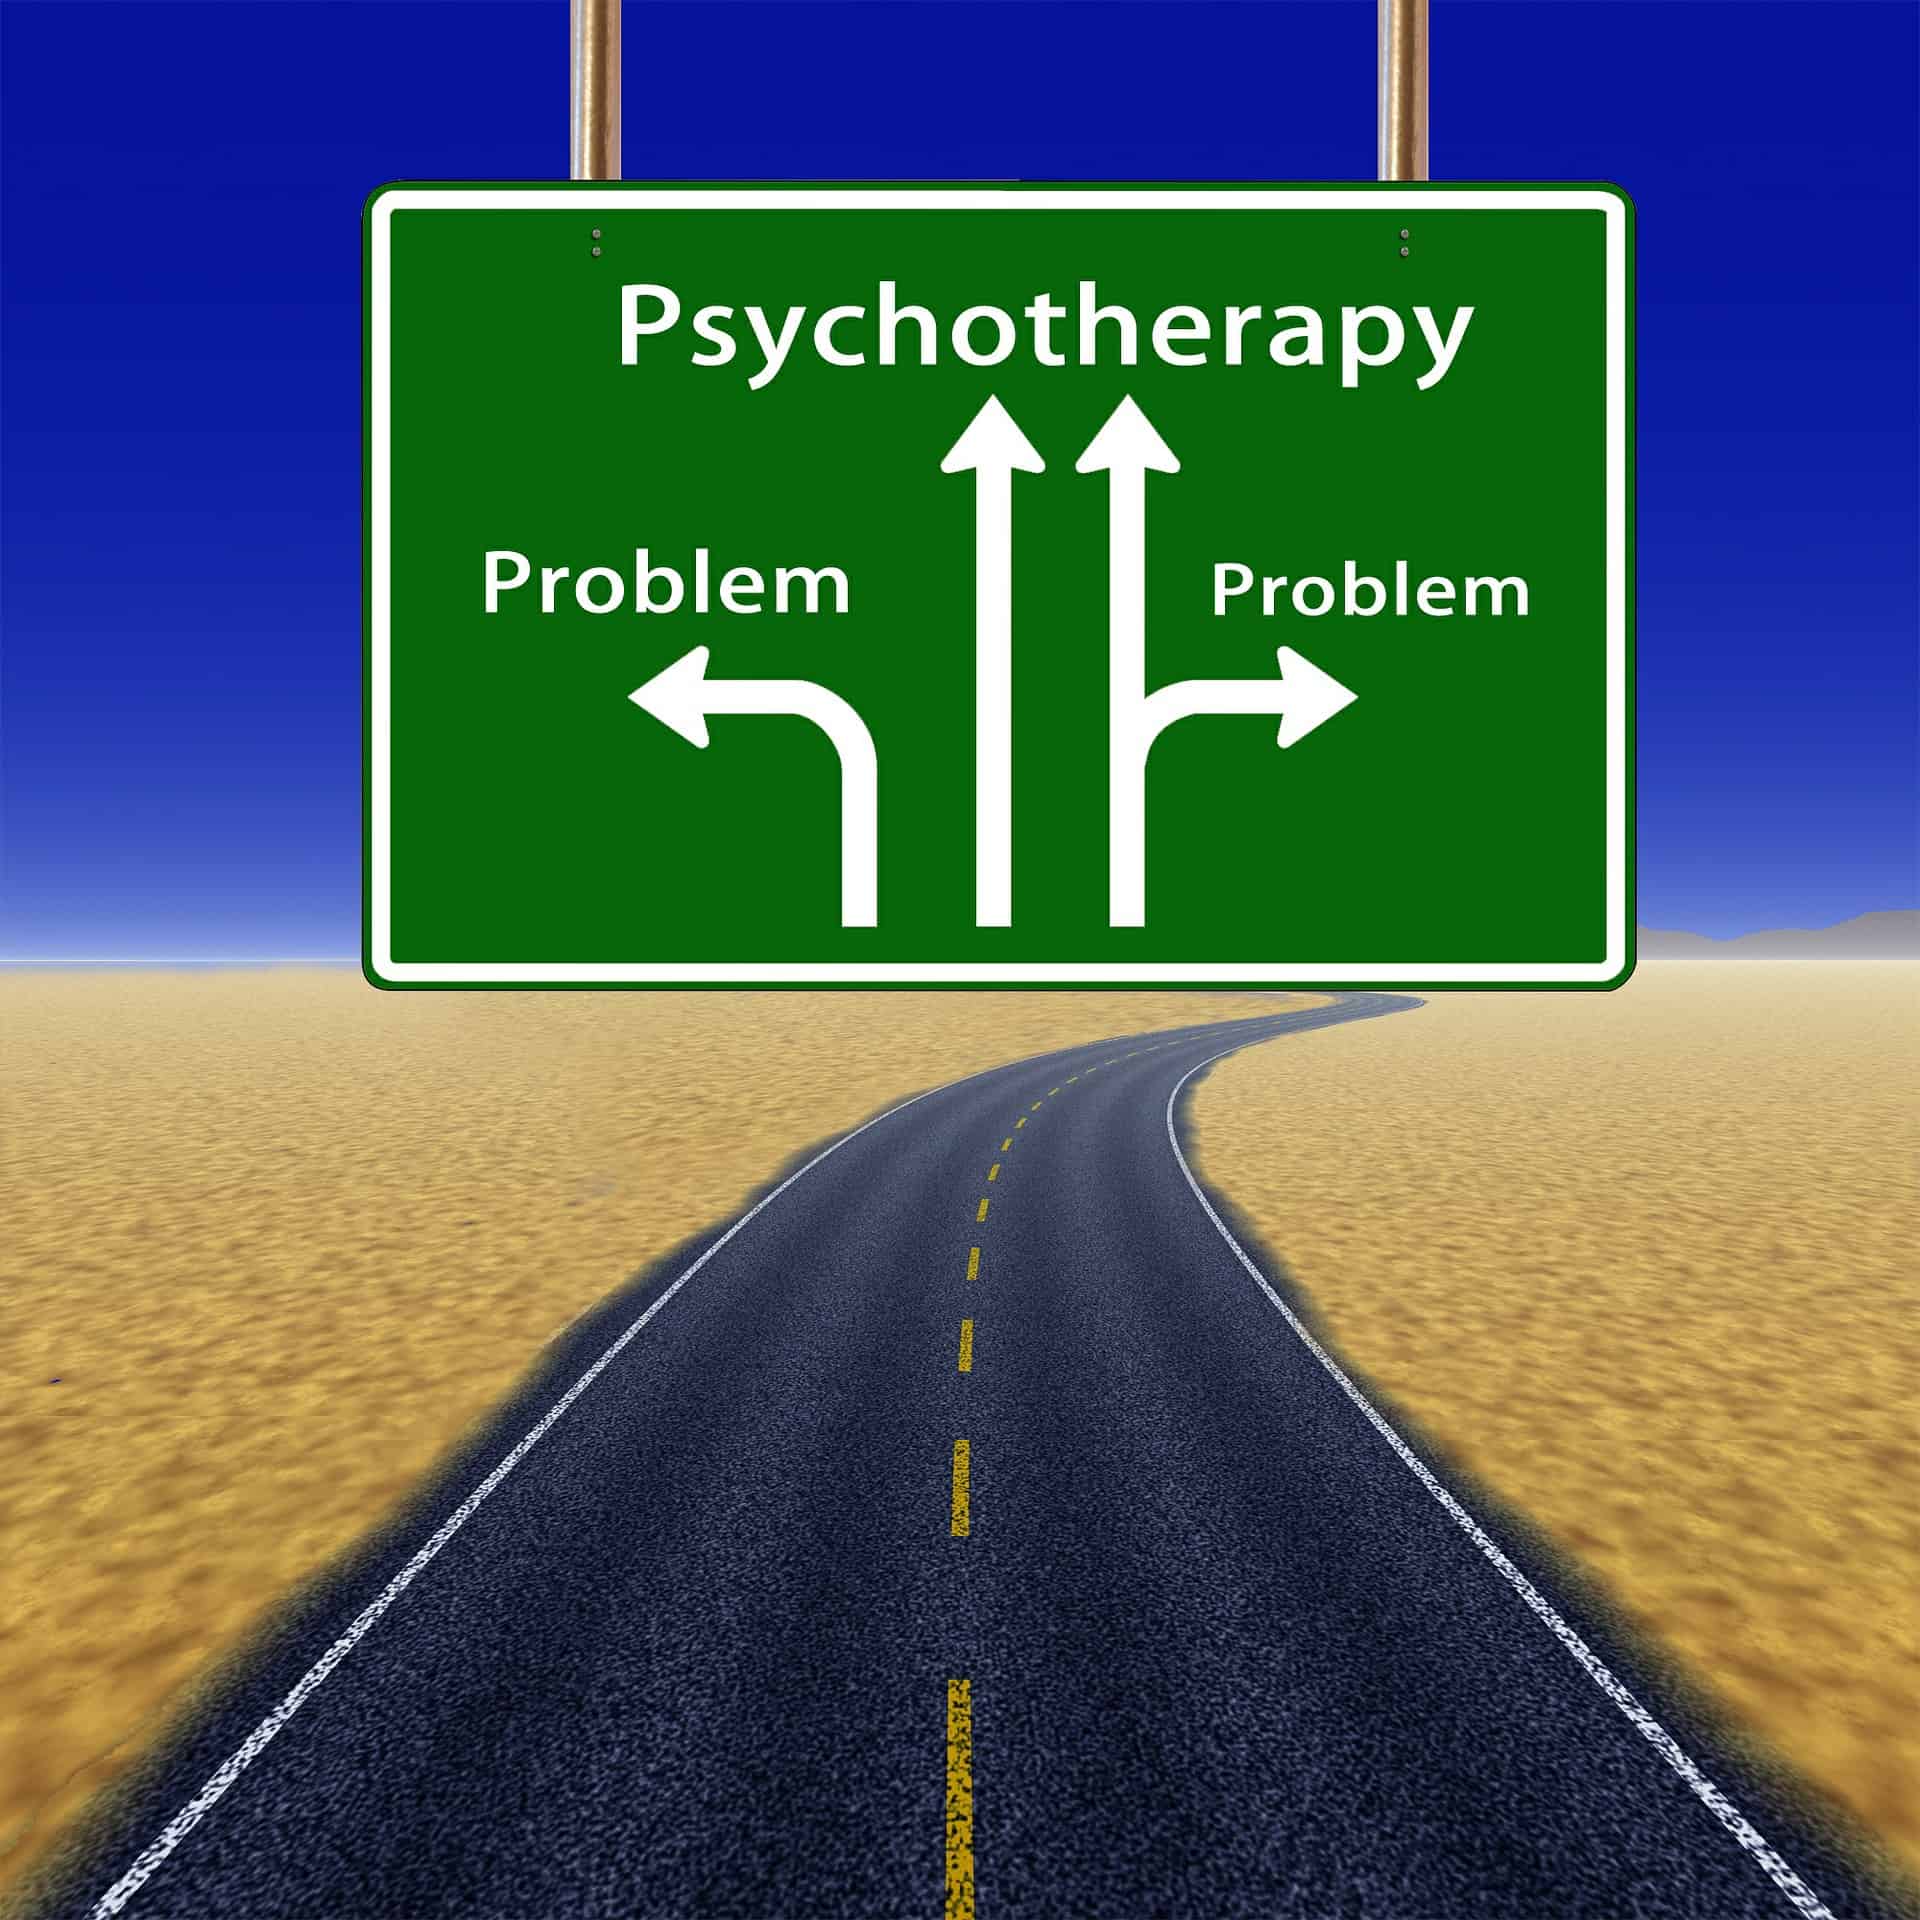 Psychotherapy Counselling Issues Worry Stress Anxiety Depressing Self-Esteem Happiness Path Journey Talk Therapy Help Infertility Bereavement Work Life Struggle